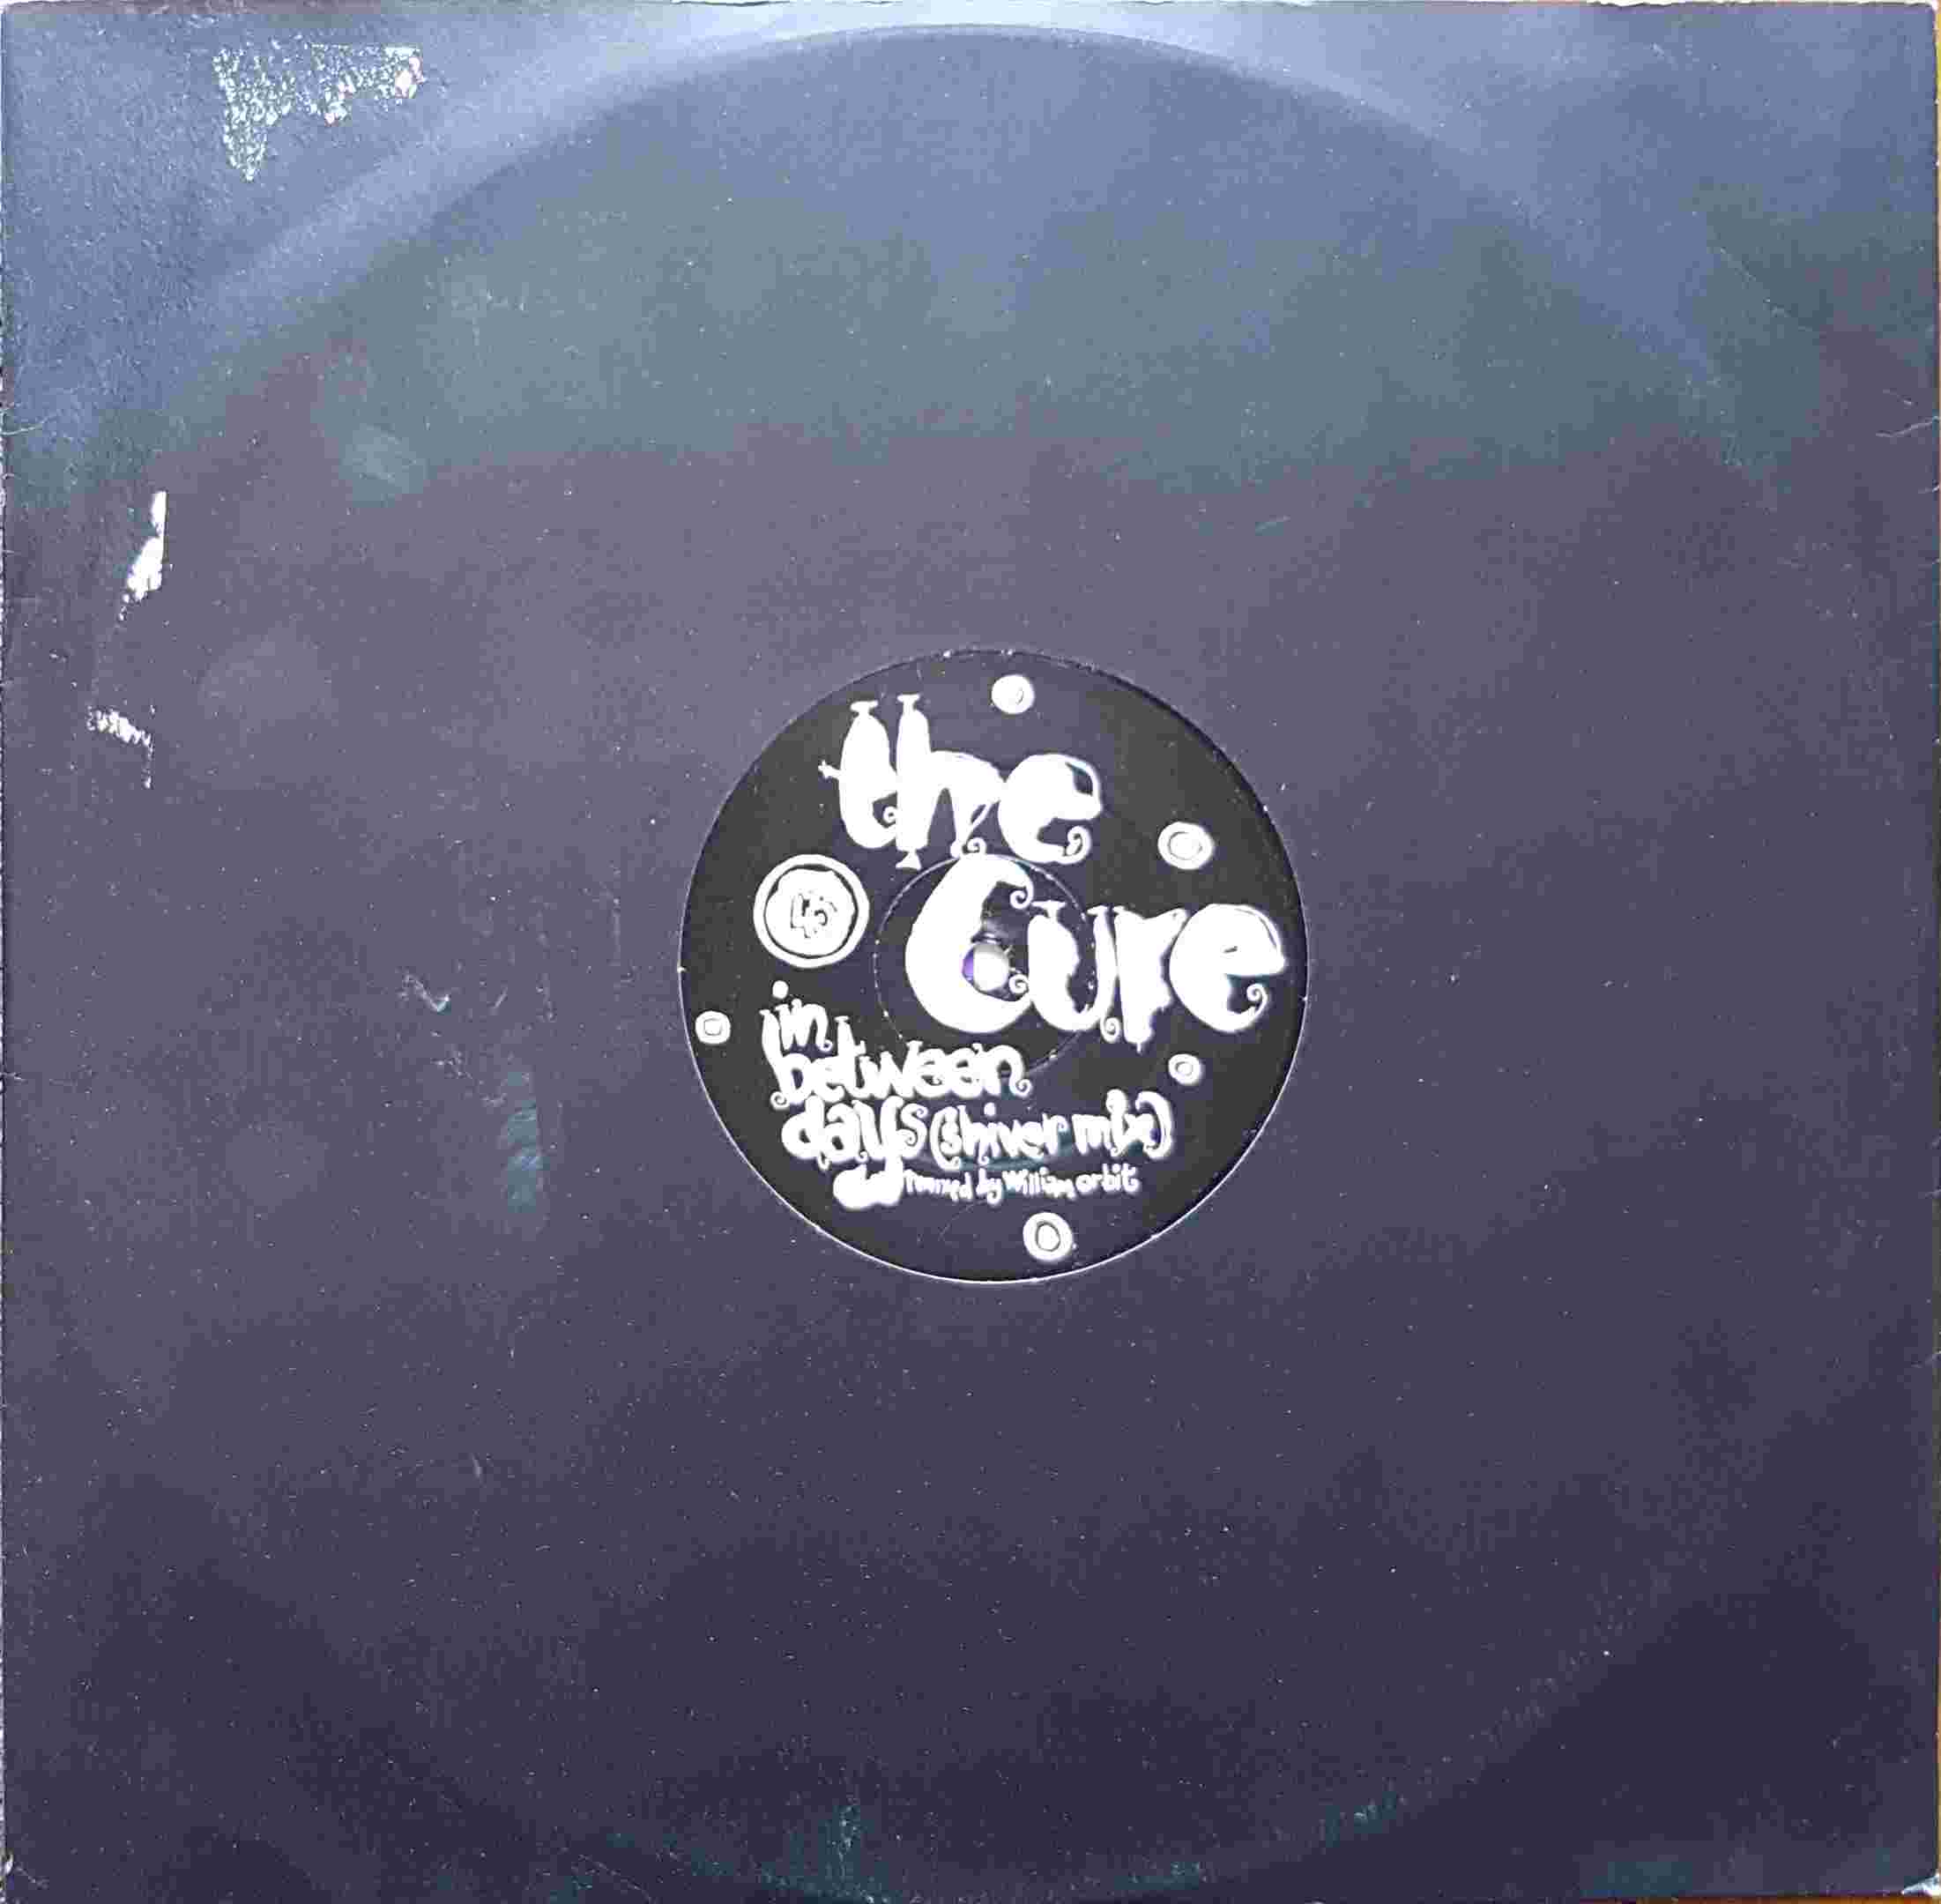 Picture of In between days (Shiver mix) by artist The Cure  